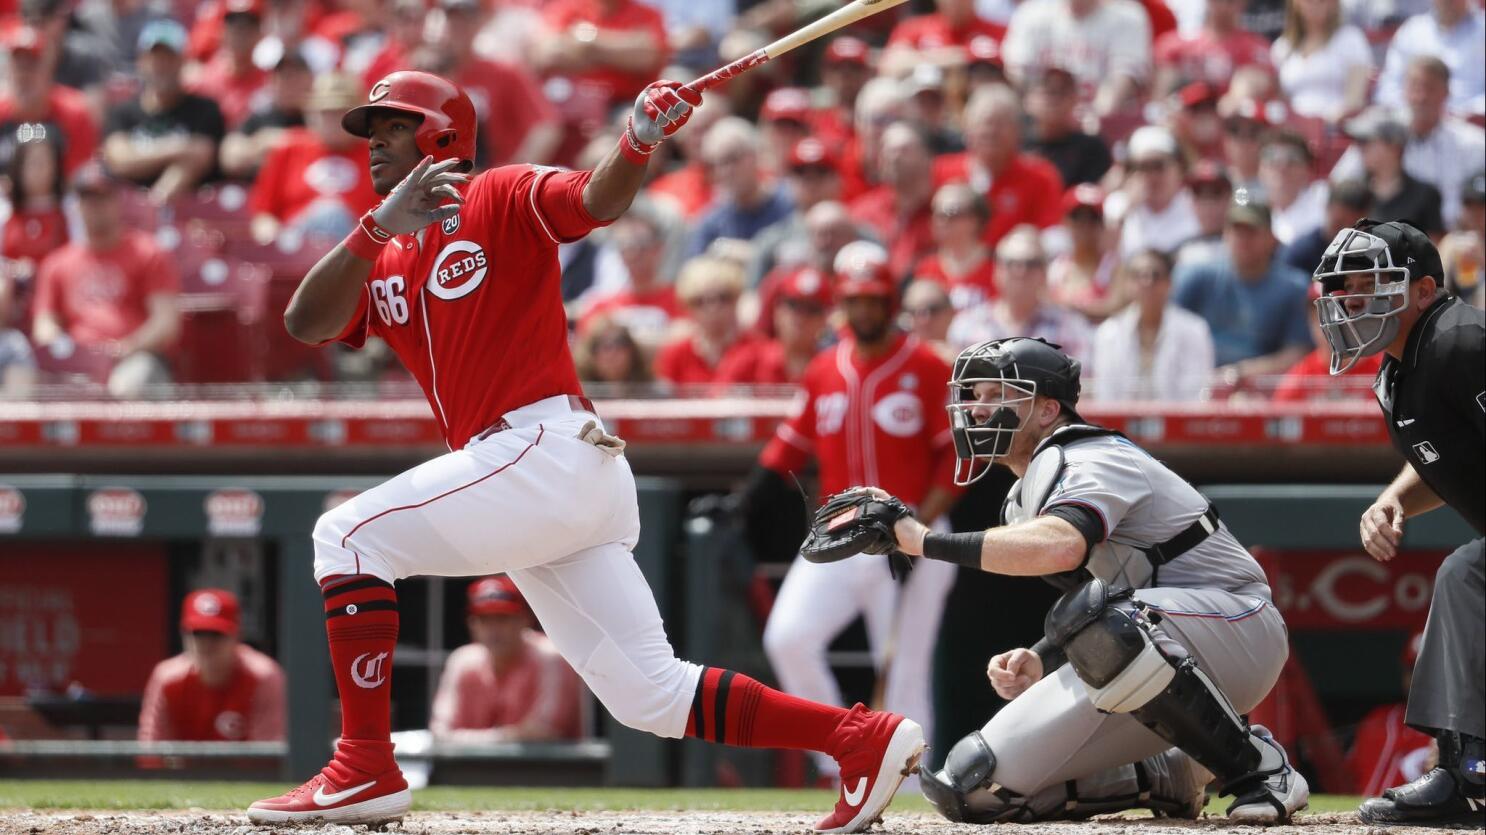 Cincinnati Reds: Will they try to re-sign Yasiel Puig?